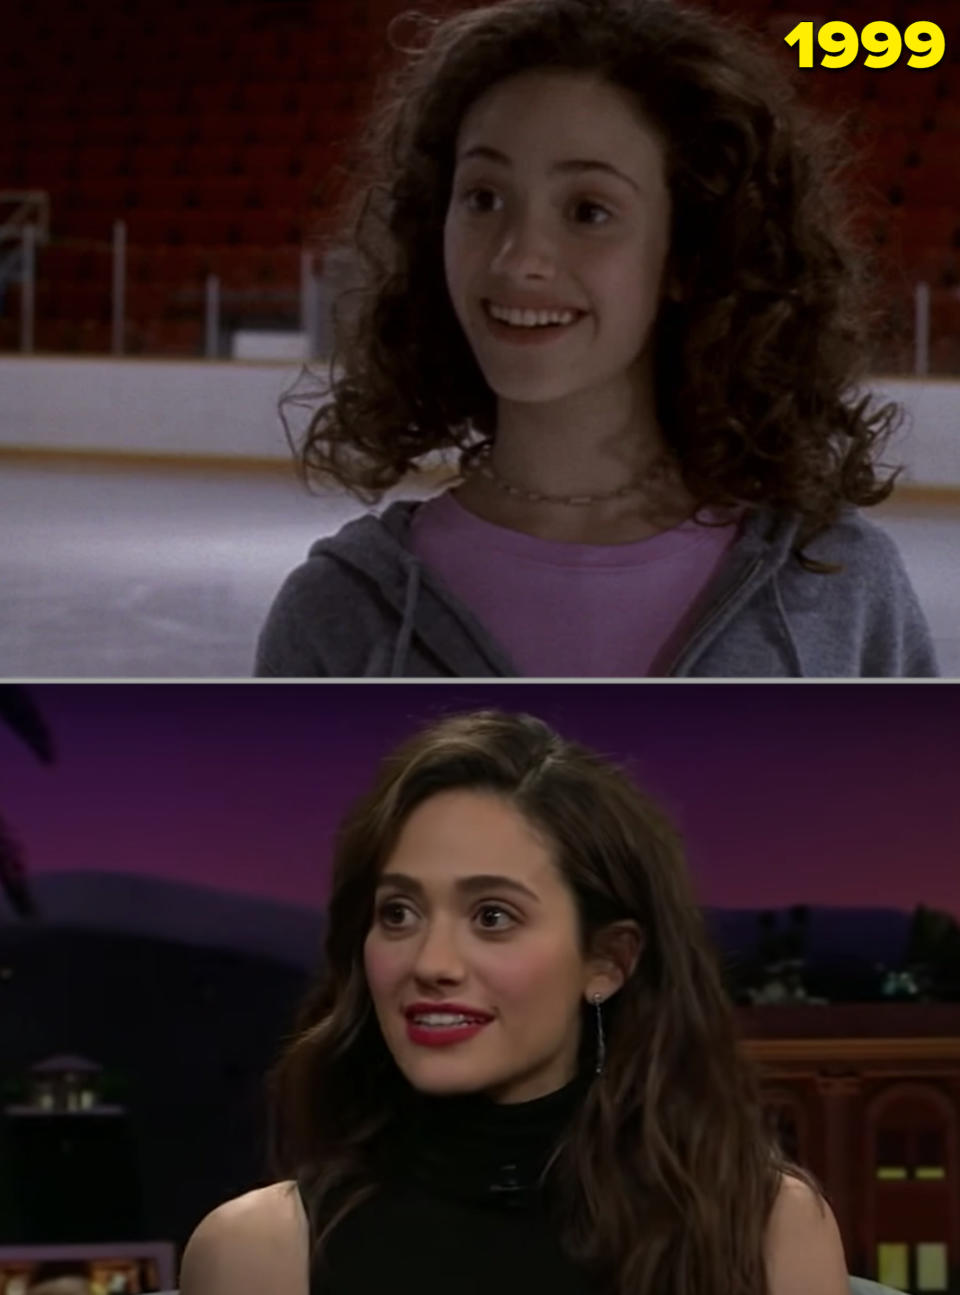 Emmy in "Genius" in the late '90s vs. her as an adult in a talk show